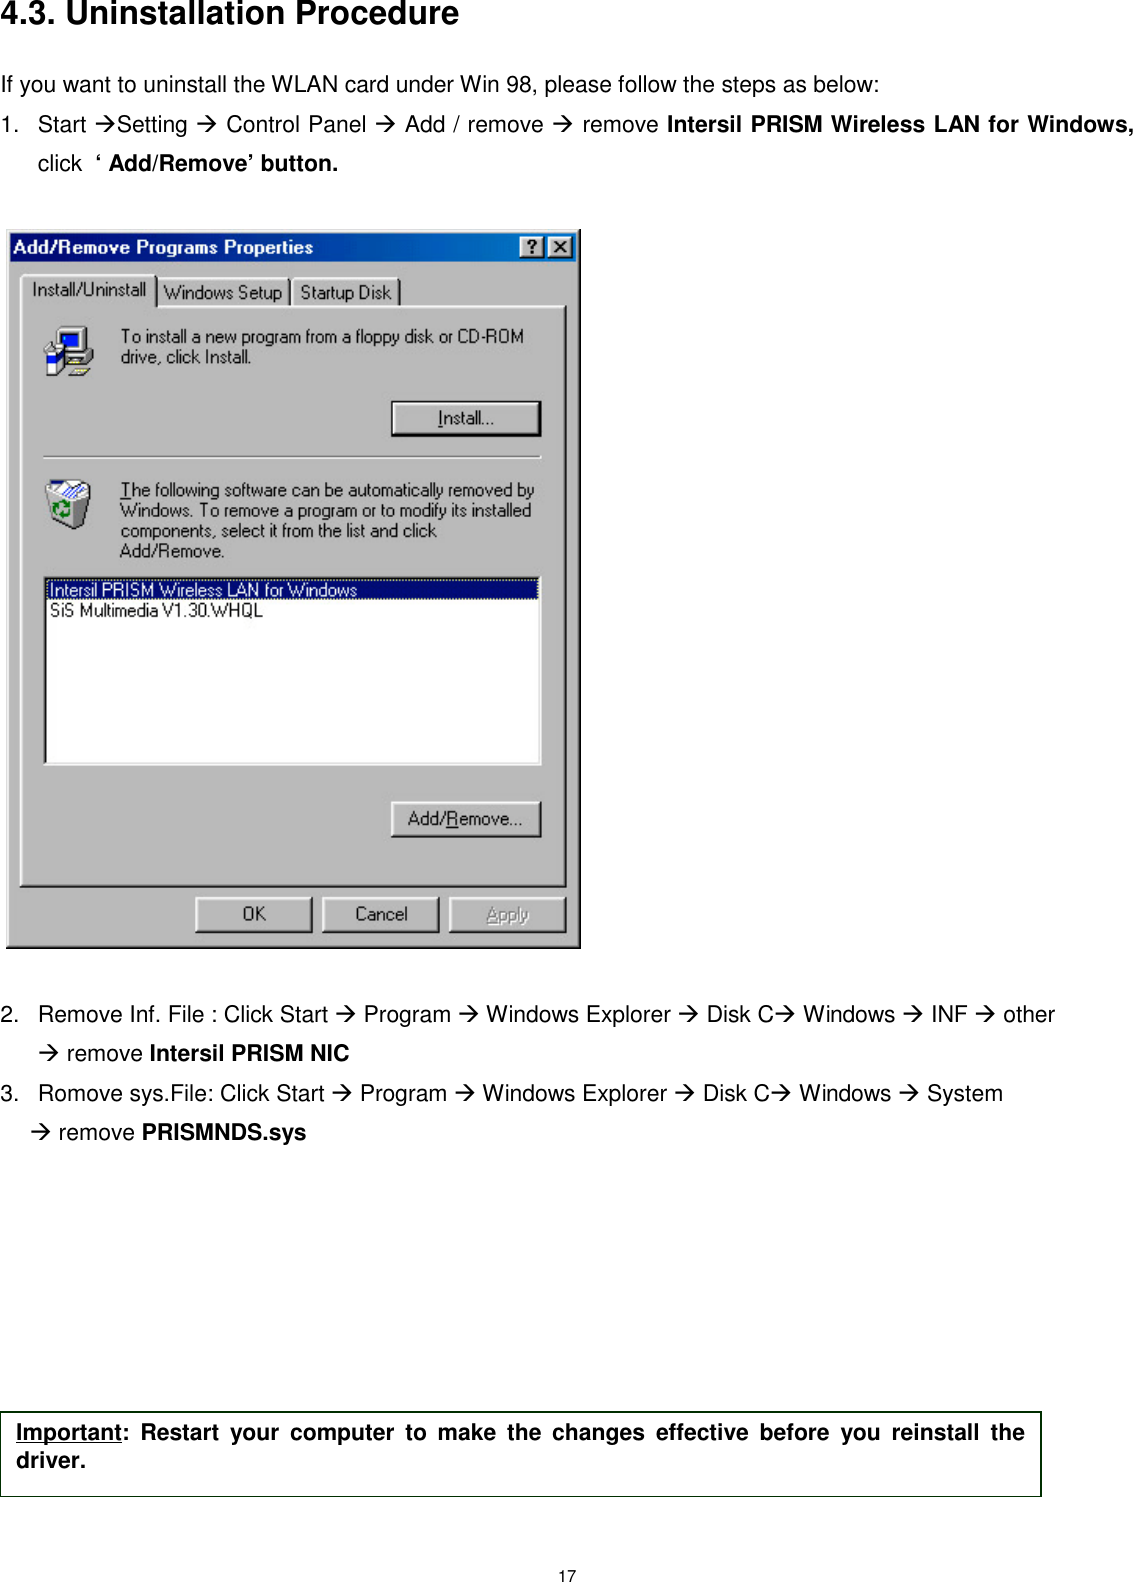 174.3. Uninstallation ProcedureIf you want to uninstall the WLAN card under Win 98, please follow the steps as below:1. Start Setting  Control Panel  Add / remove  remove Intersil PRISM Wireless LAN for Windows,click  ‘ Add/Remove’ button. 2.  Remove Inf. File : Click Start  Program  Windows Explorer  Disk C Windows  INF  other remove Intersil PRISM NIC3.  Romove sys.File: Click Start  Program  Windows Explorer  Disk C Windows  System  remove PRISMNDS.sys       Important: Restart your computer to make the changes effective before you reinstall thedriver.